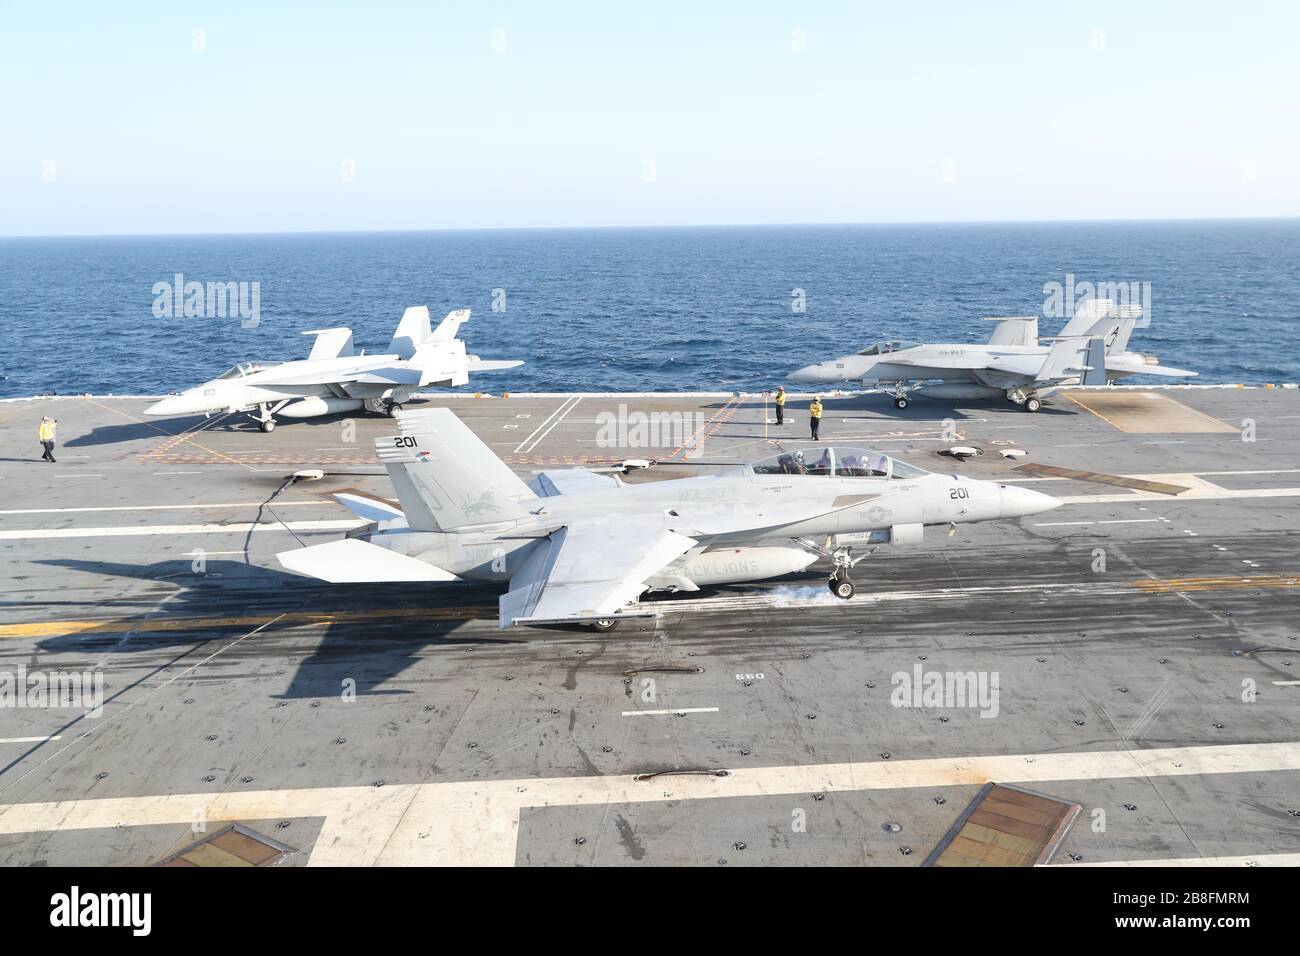 ATLANTIC OCEAN (March 19, 2020) An F/A-18E hornet, attached to the 'Blacklions' of Strike Fighter Squadron (VFA) 213, lands on USS Gerald R. Ford's (CVN 78) flight deck during flight operations. Ford is currently underway conducting its flight deck and combat air traffic control center certifications. (U.S. Navy photo by Mass Communication Specialist 1st Class Gary Prill) Stock Photo